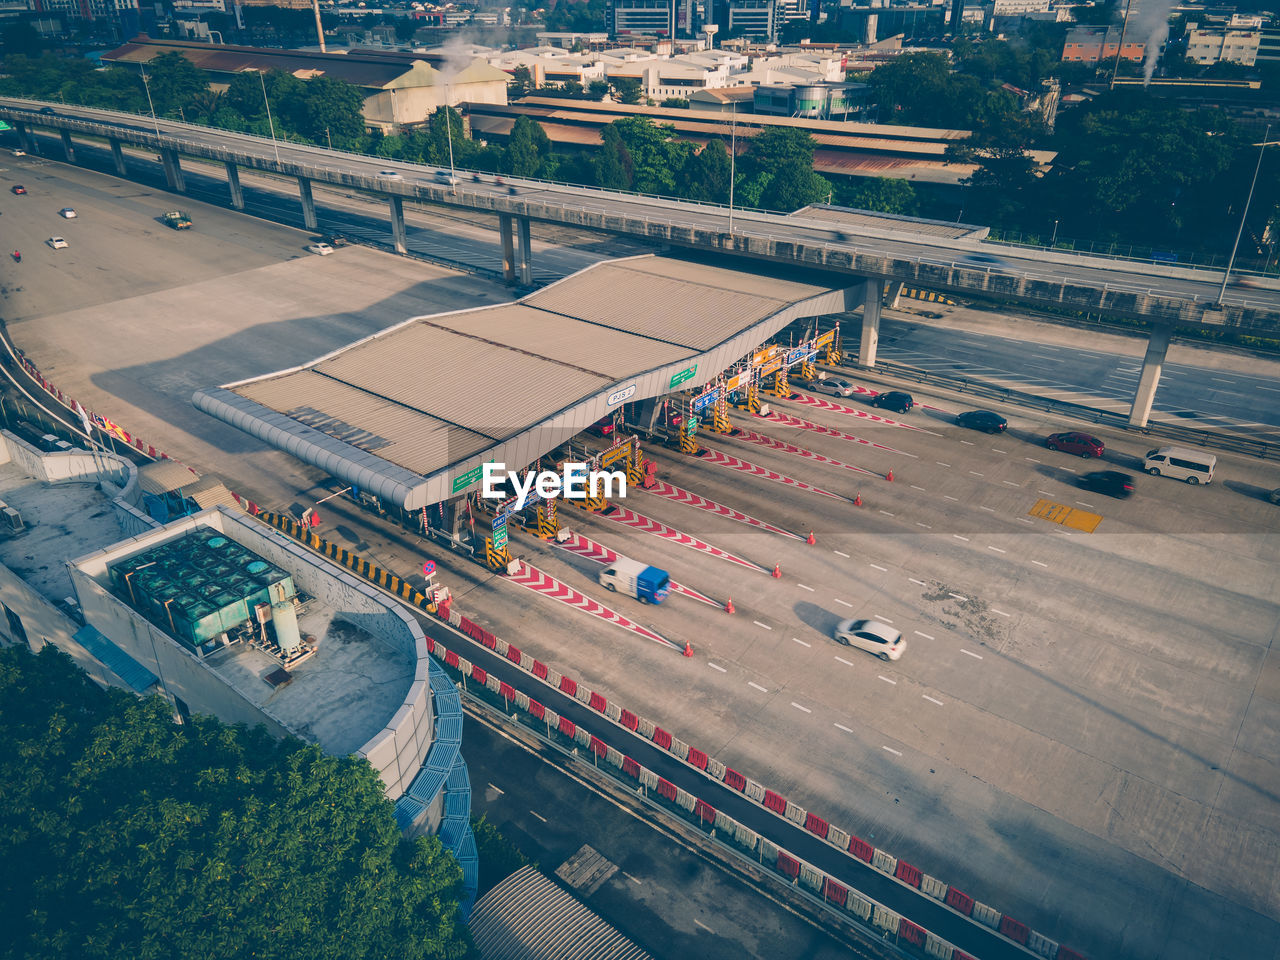 An aerial view of a toll booth